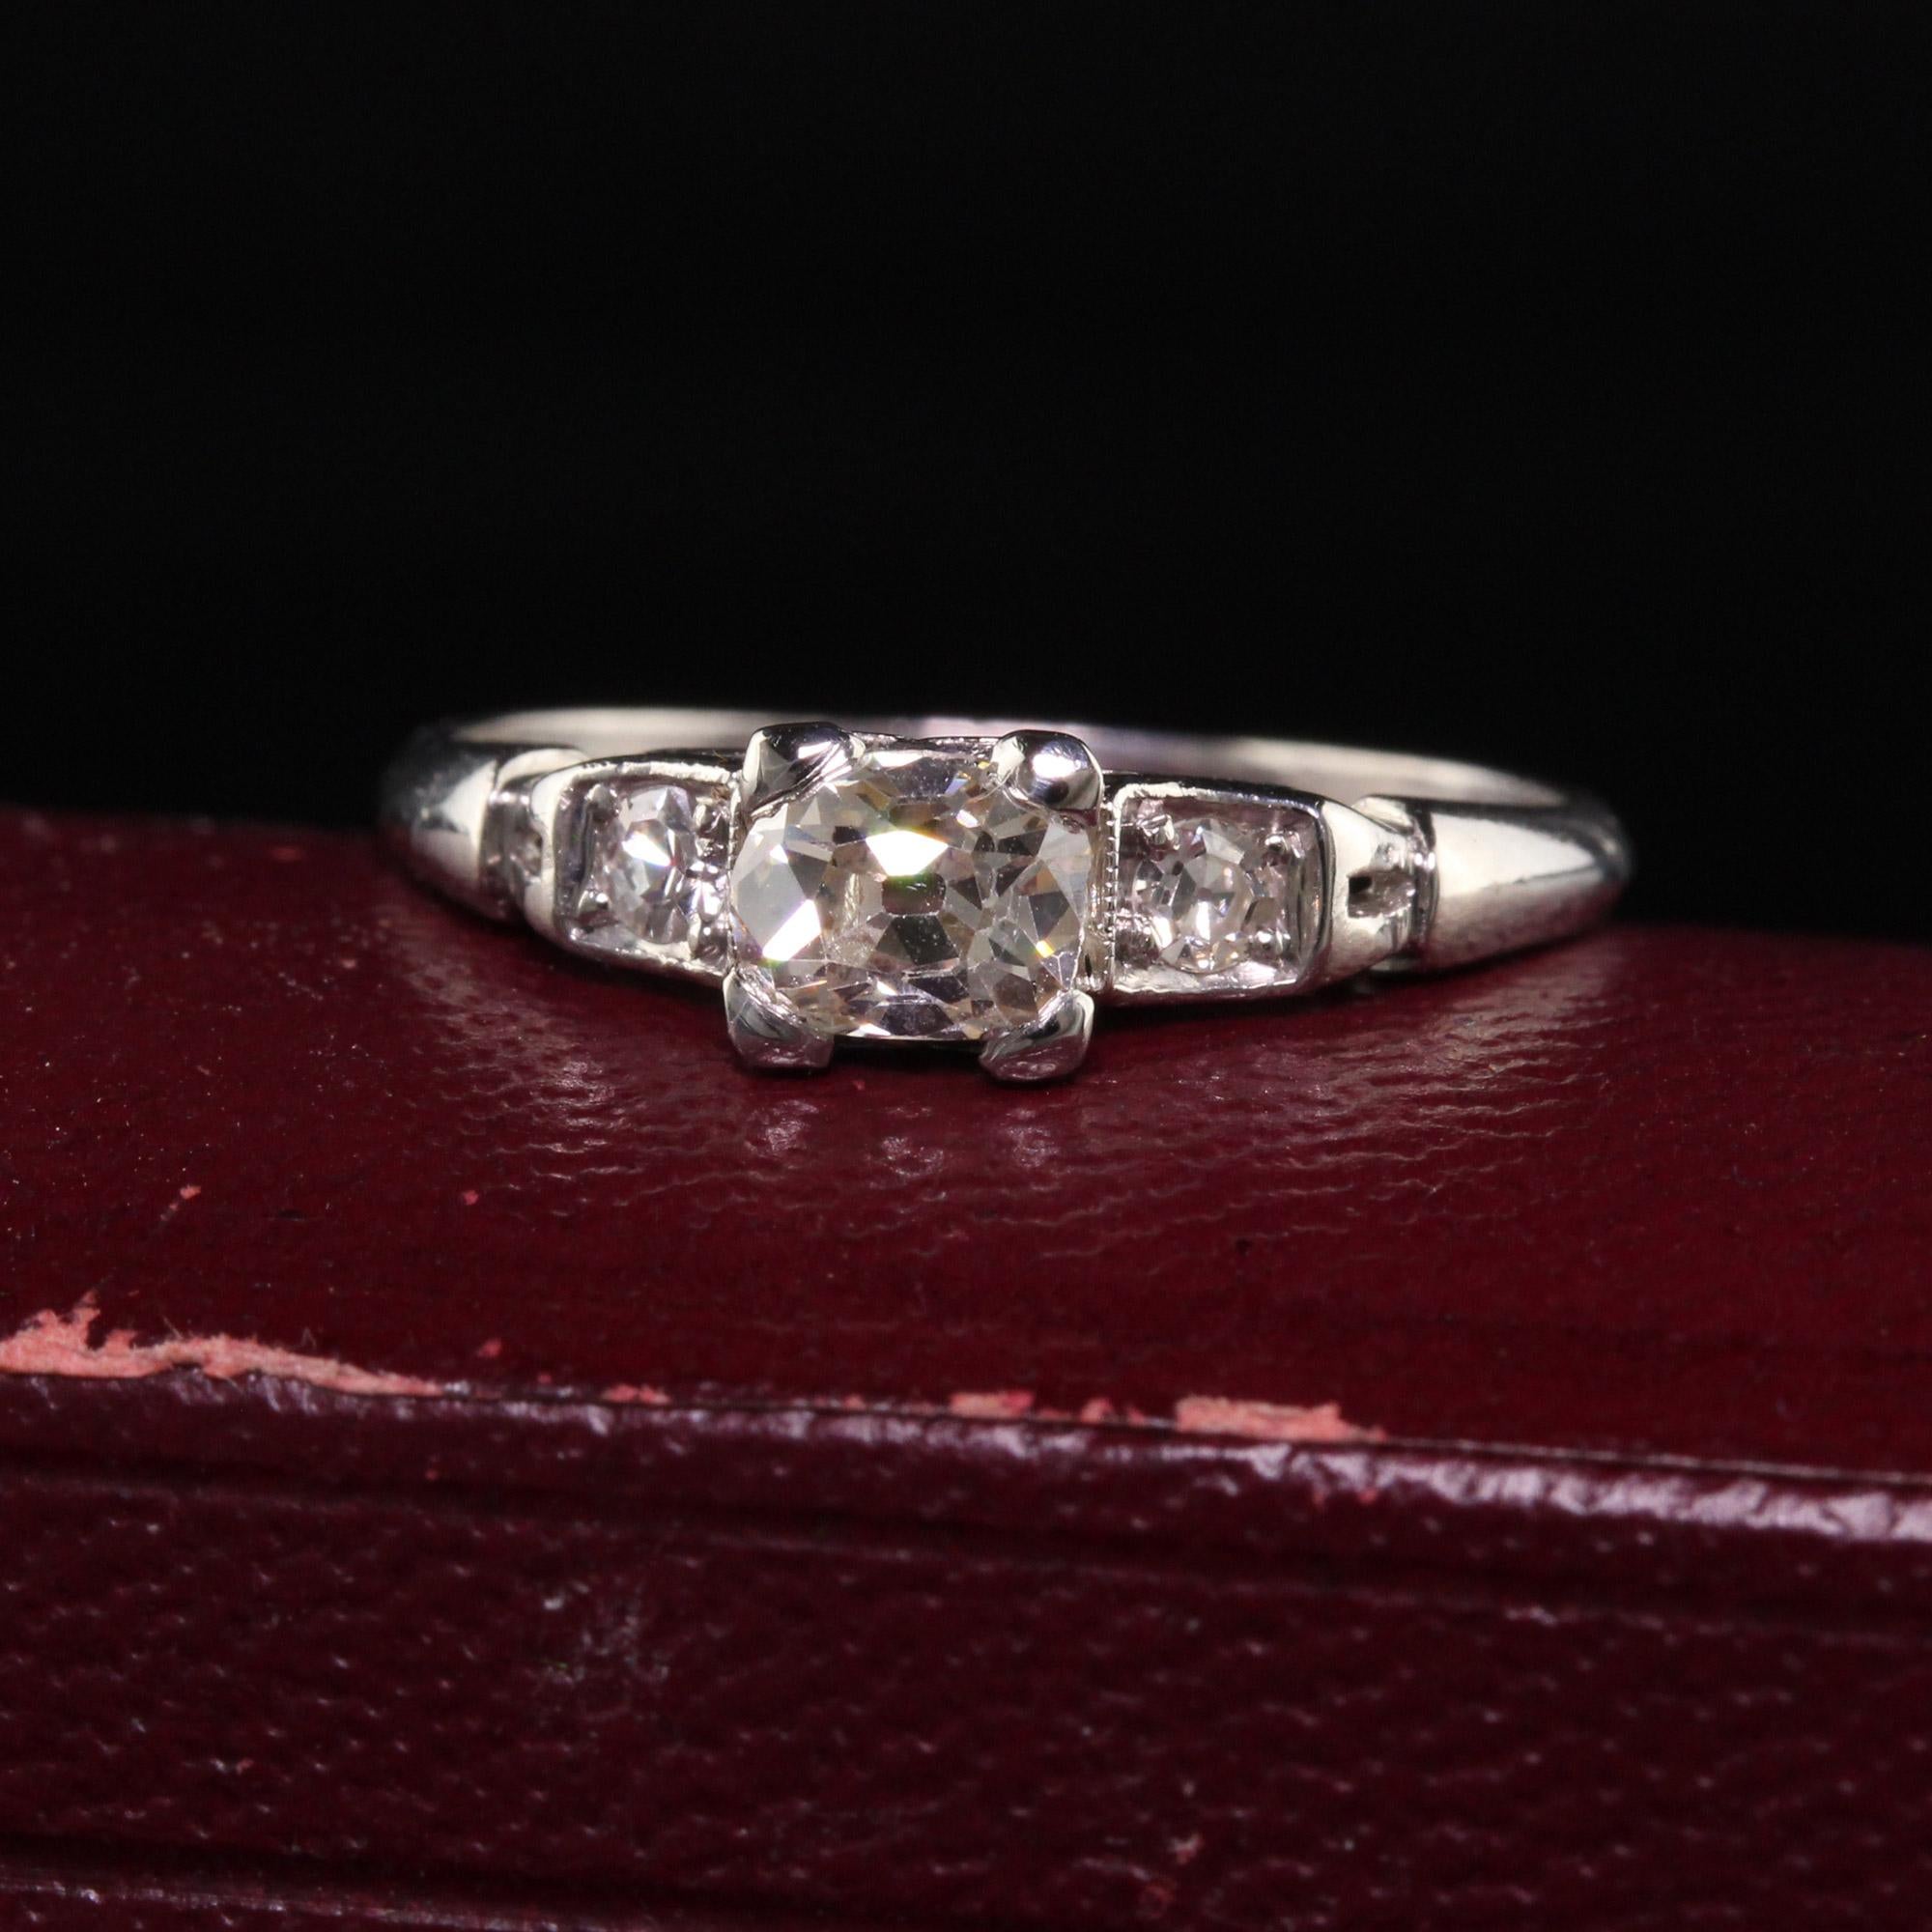 Beautiful Antique Art Deco Platinum Old Mine Cut Diamond Engagement Ring. This beautiful ring is crafted in platinum. The center holds a beautiful old mine cut diamond that is set east to west and the sides hold two old european cut diamonds. It is